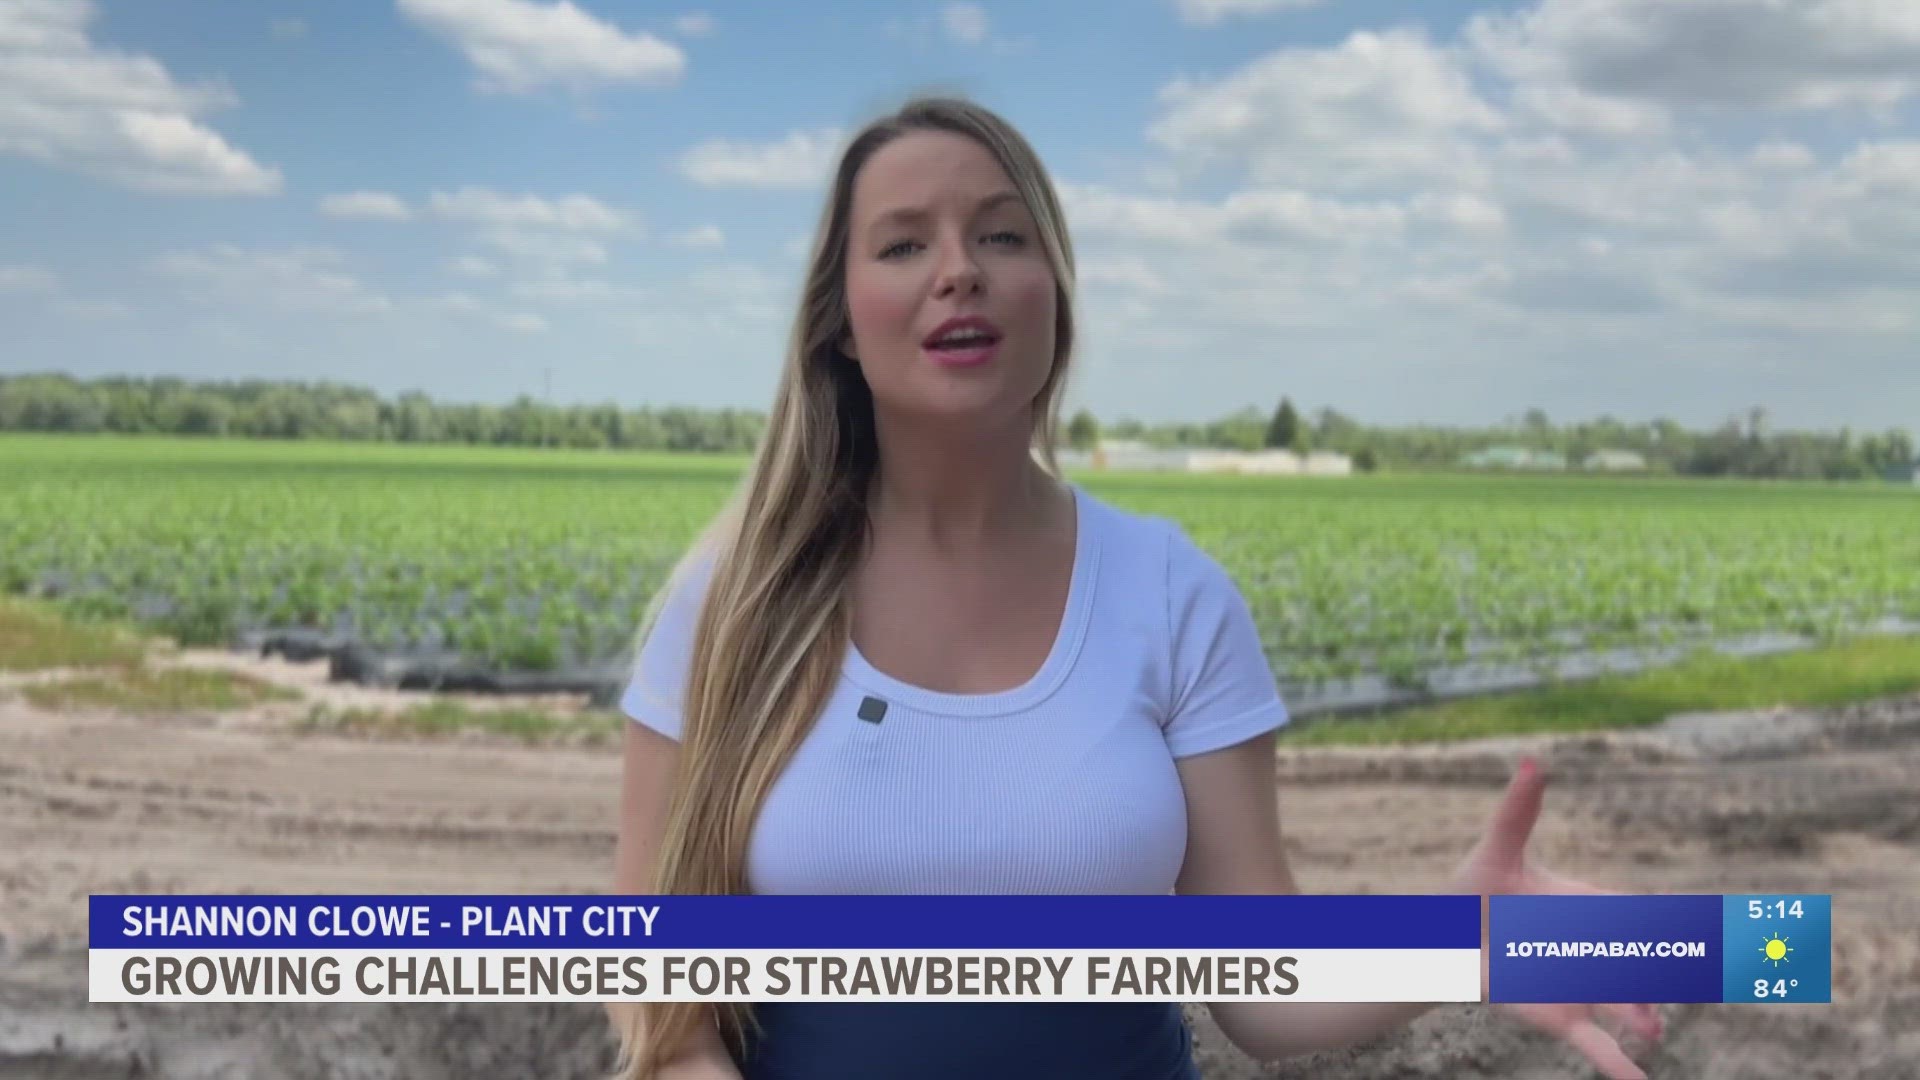 Some farmers in Plant City said they are looking for additional land to grow on because there are so many new homes being developed around their farms.